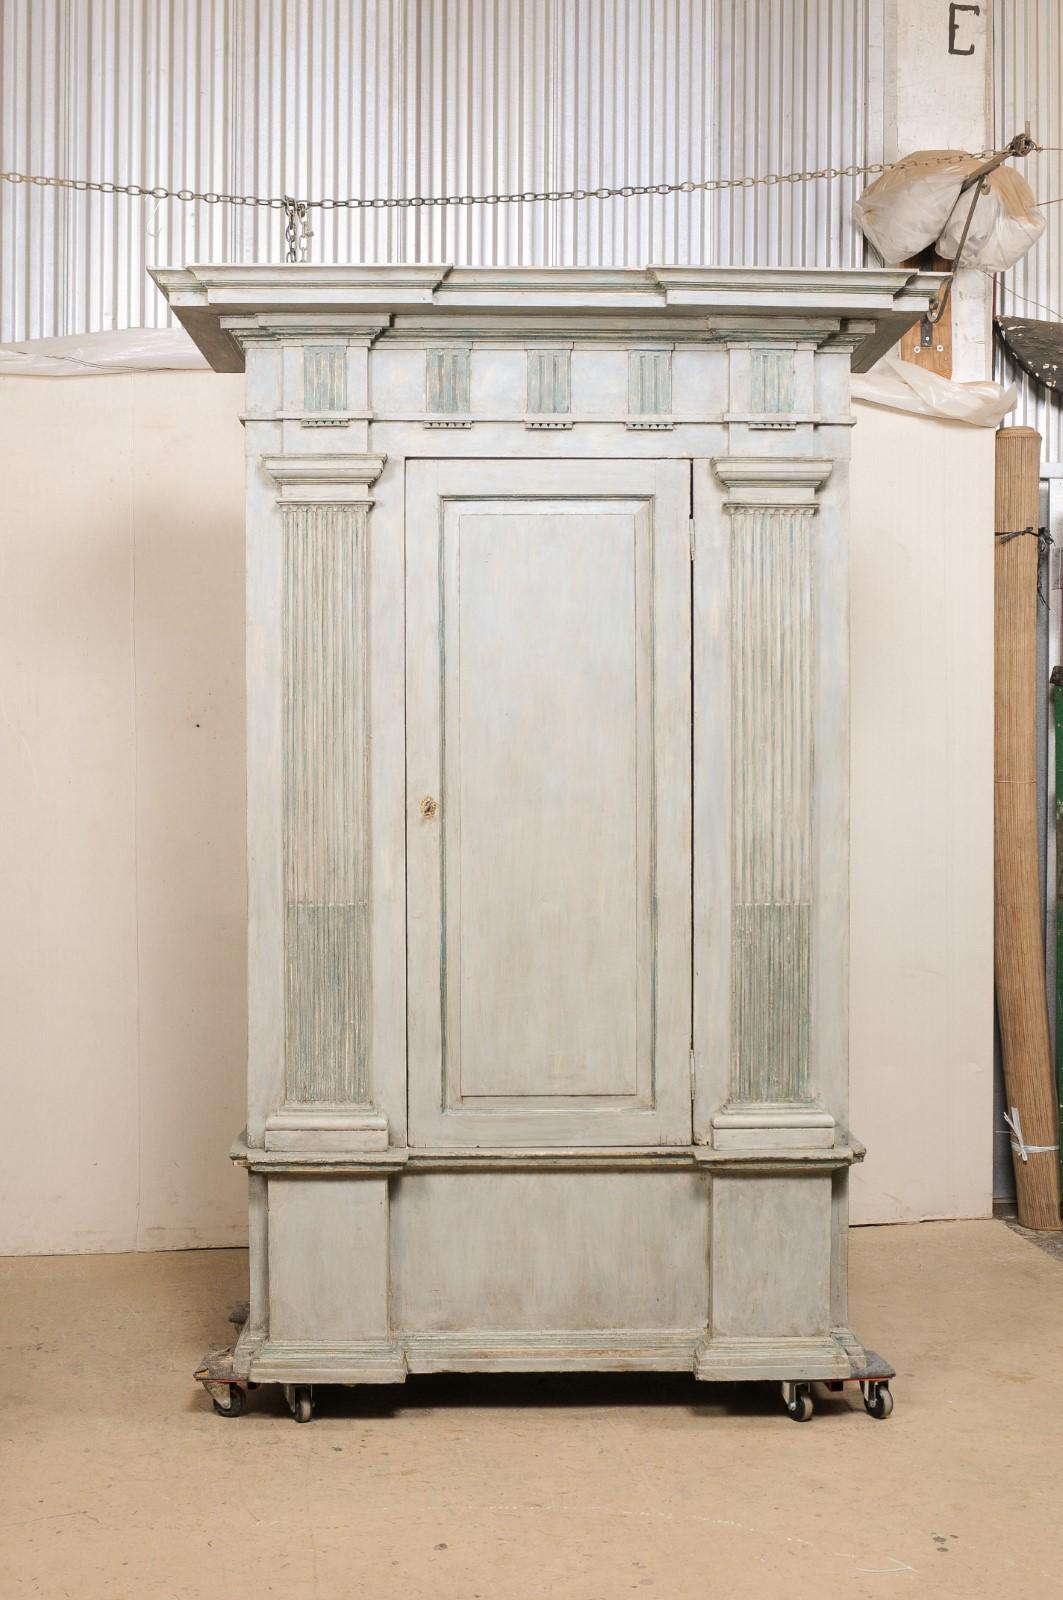 An Italian large-sized cabinet, with inner cedar trunk, from the turn of the 18th and 19th century. This antique guardaroba (wardrobe) from Italy is impressively sized at approximately 8.25 feet in height and nearly 6 feet wide. The cabinet is